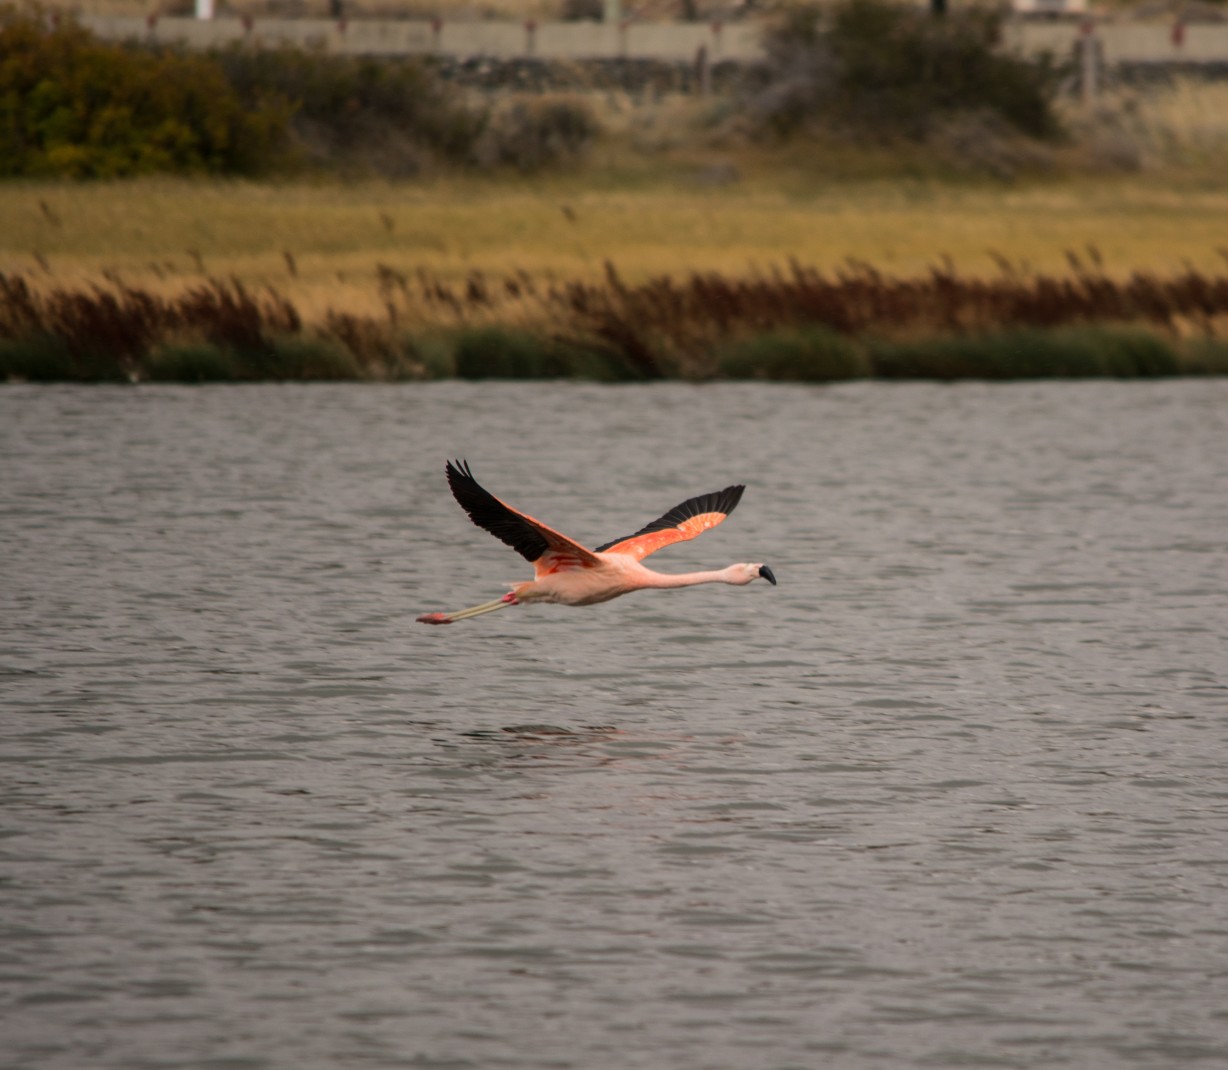 Laguna Nimez bird sanctuary in El Calafate, Argenina with a pink and black-winged flamingo flying over the dark blue water with brown and green tall grass lining the lake water.